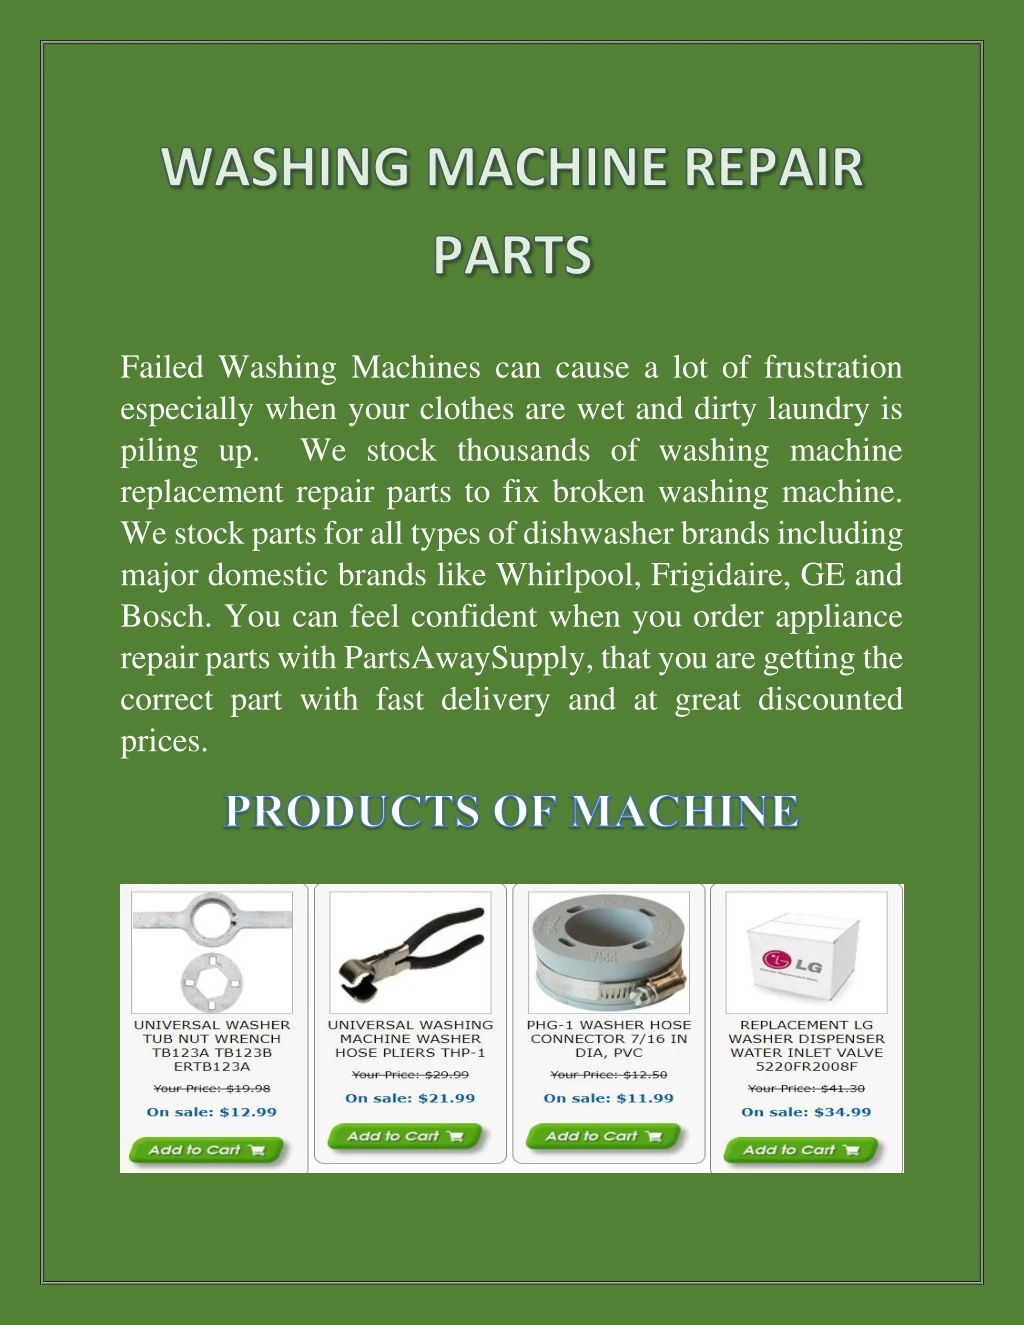 failed washing machines can cause